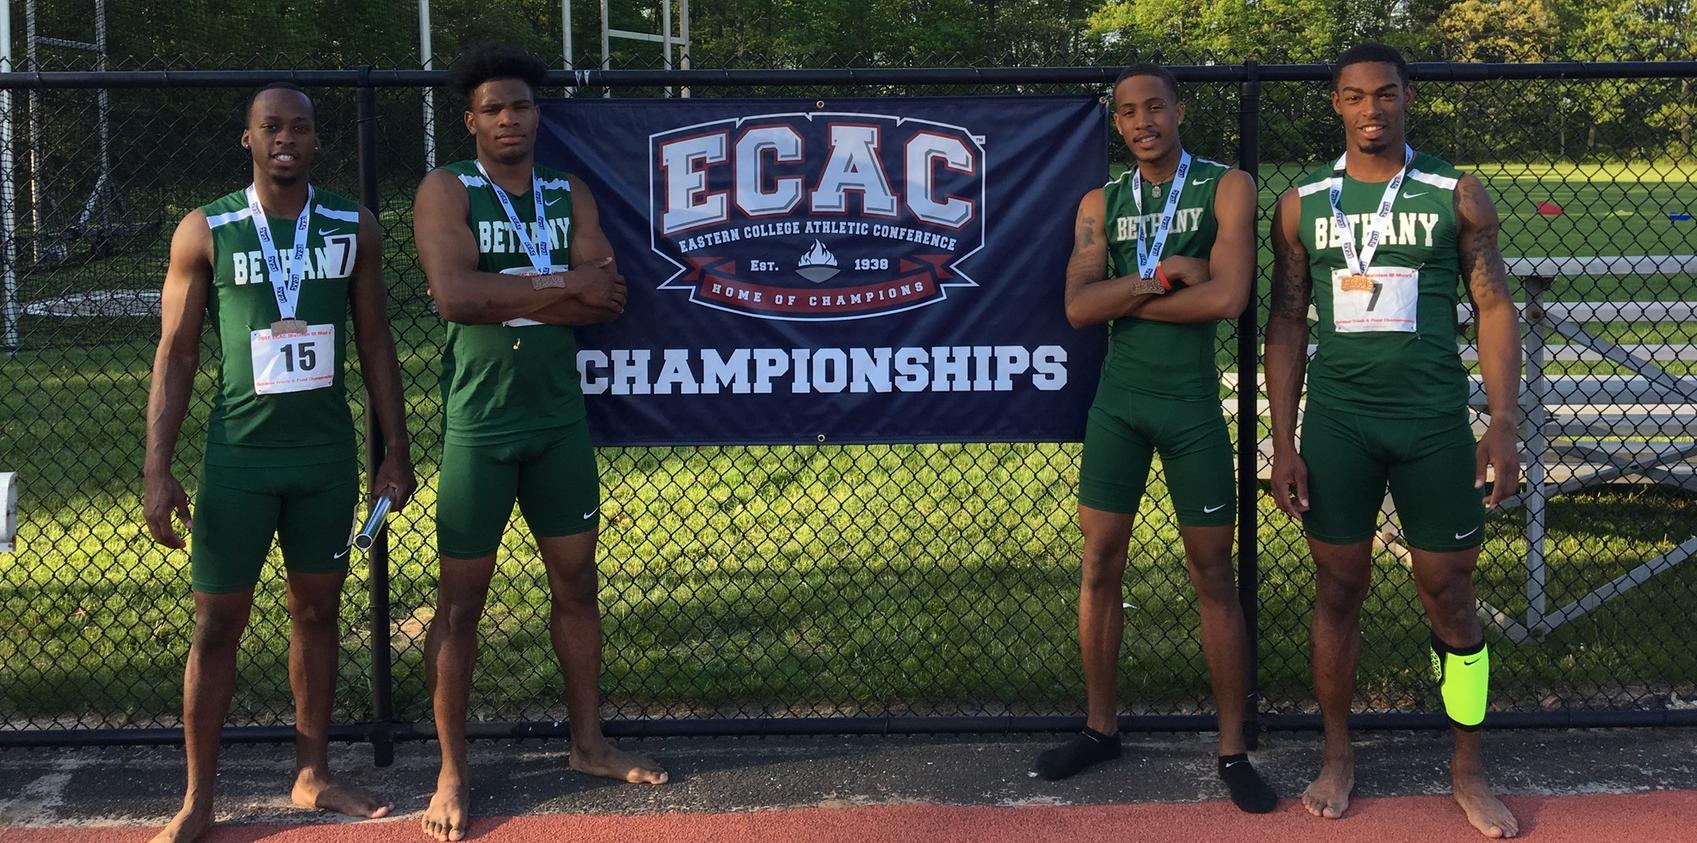 Sallah-Mohammed wins long jump to highlight ECAC Track and Field Championships